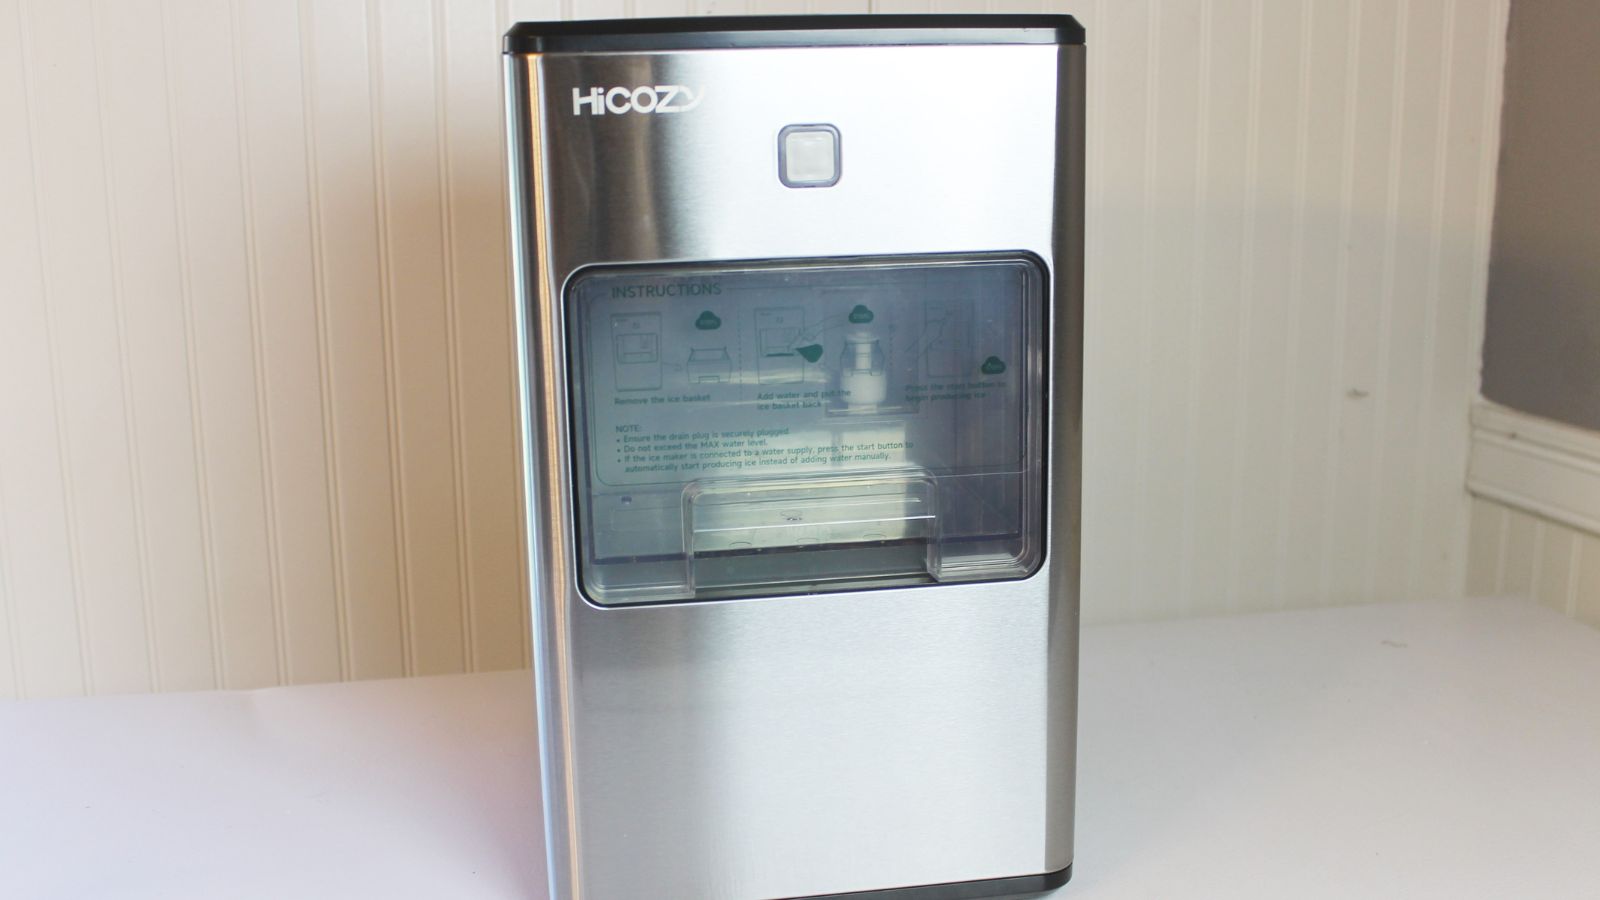 HiCozy HAMBBS2BK Daily Nugget Ice Maker Dual Mode 55lb Black Used